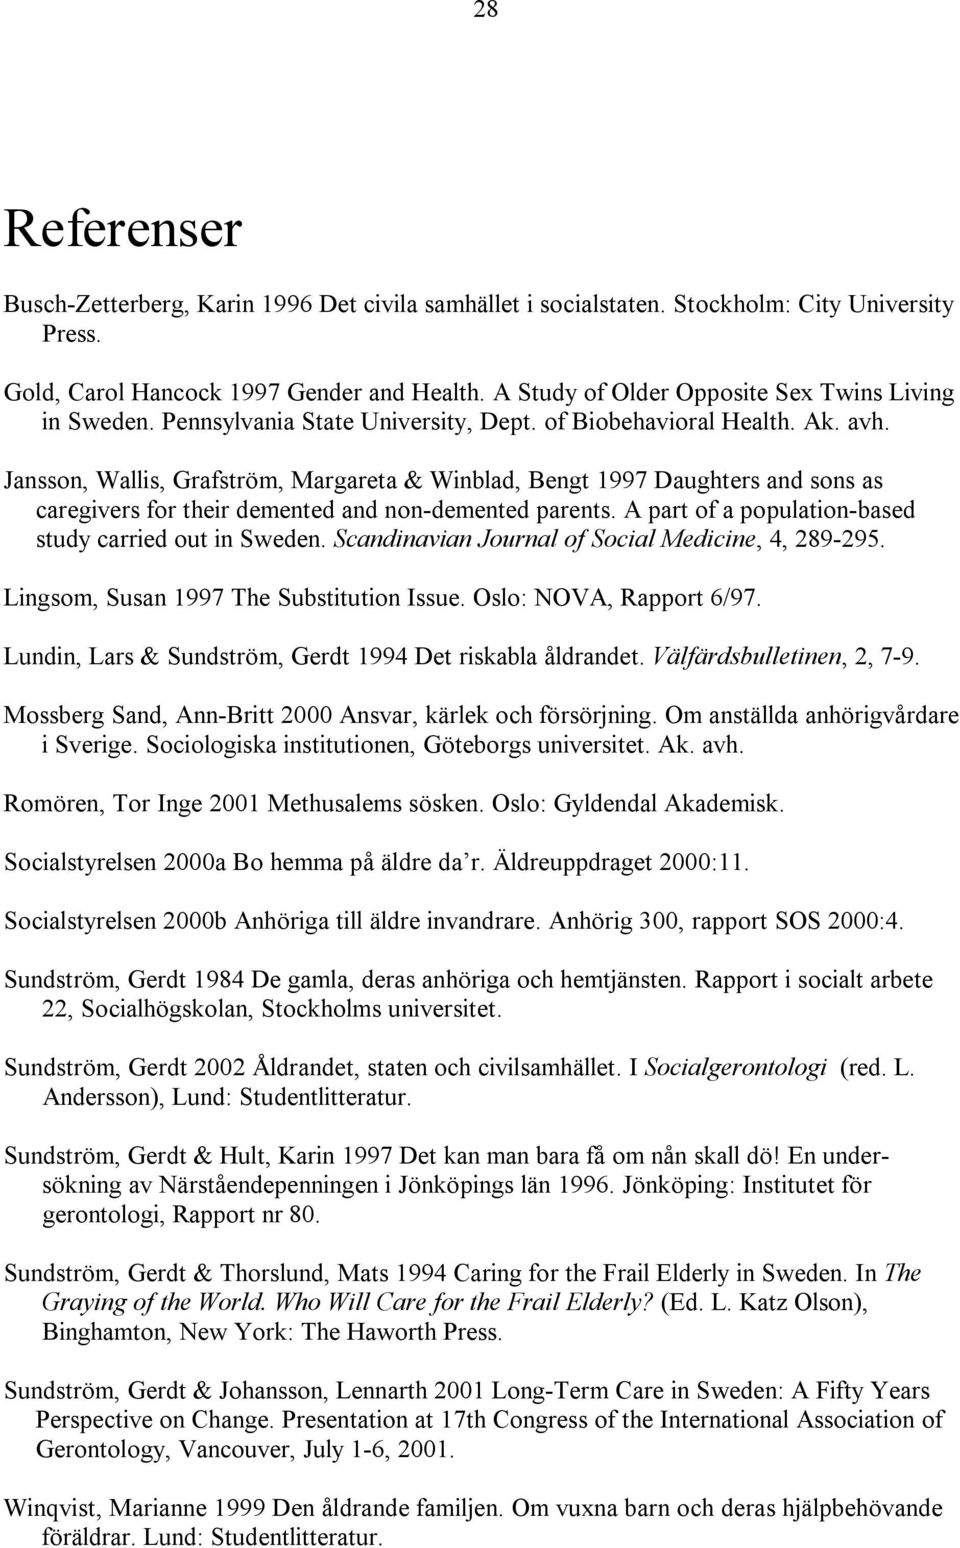 Jansson, Wallis, Grafström, Margareta & Winblad, Bengt 1997 Daughters and sons as caregivers for their demented and non-demented parents. A part of a population-based study carried out in Sweden.